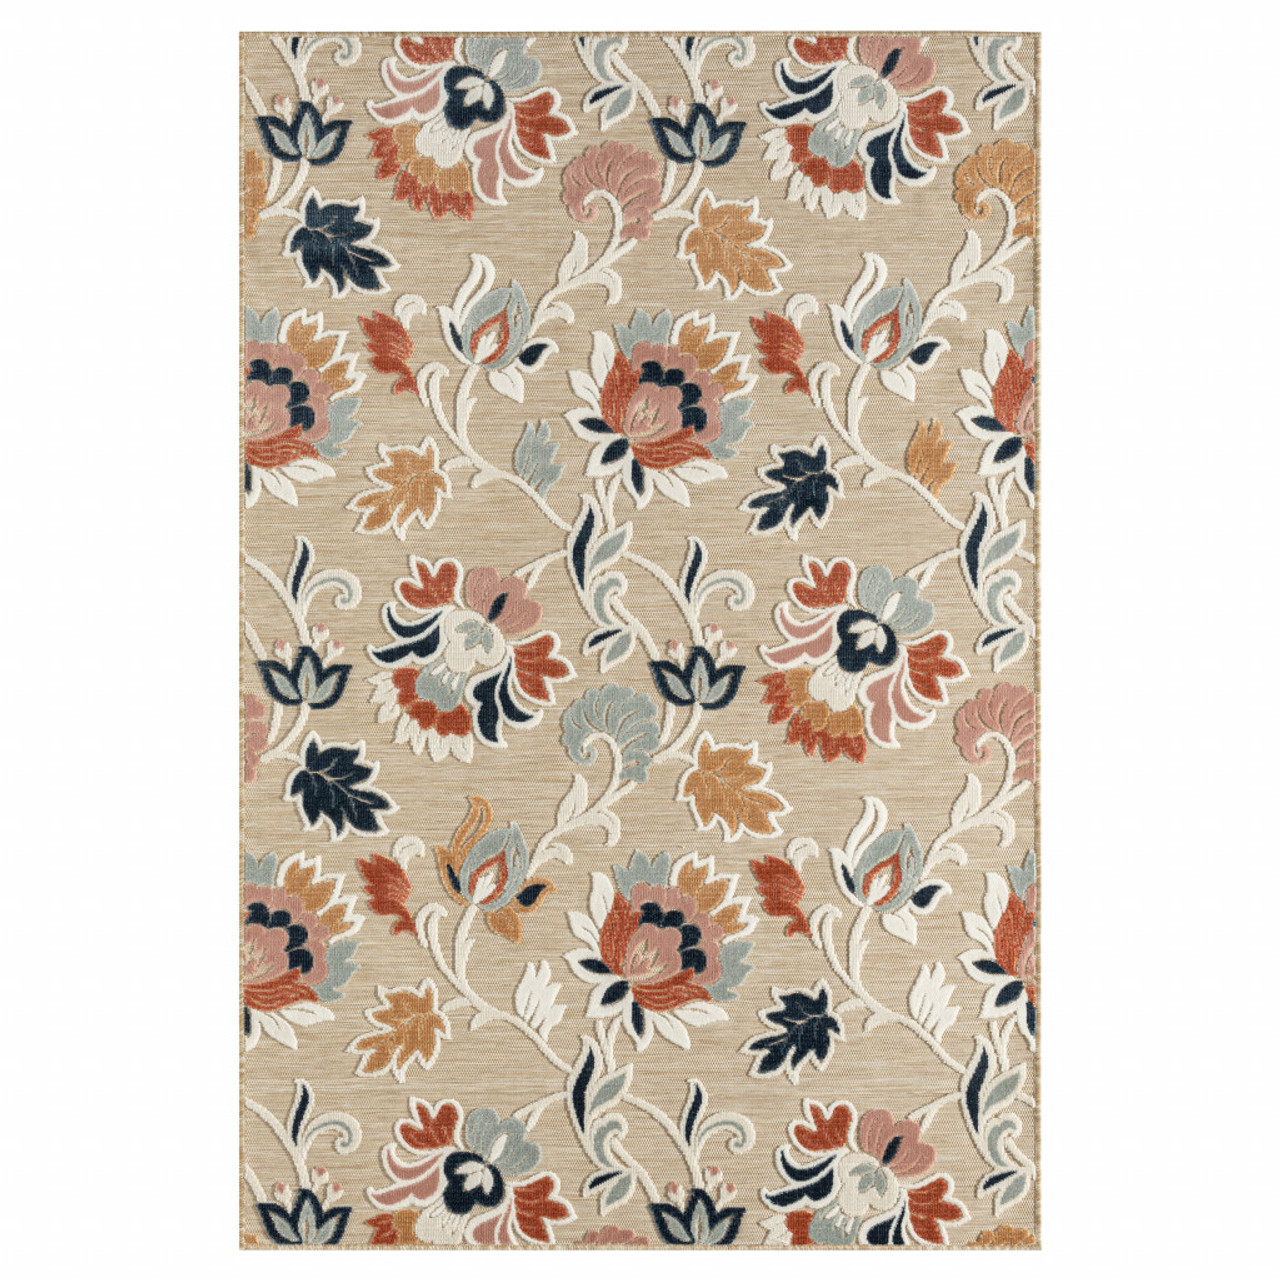 8' X 10' Blue And Beige Floral Stain Resistant Indoor Outdoor Area Rug